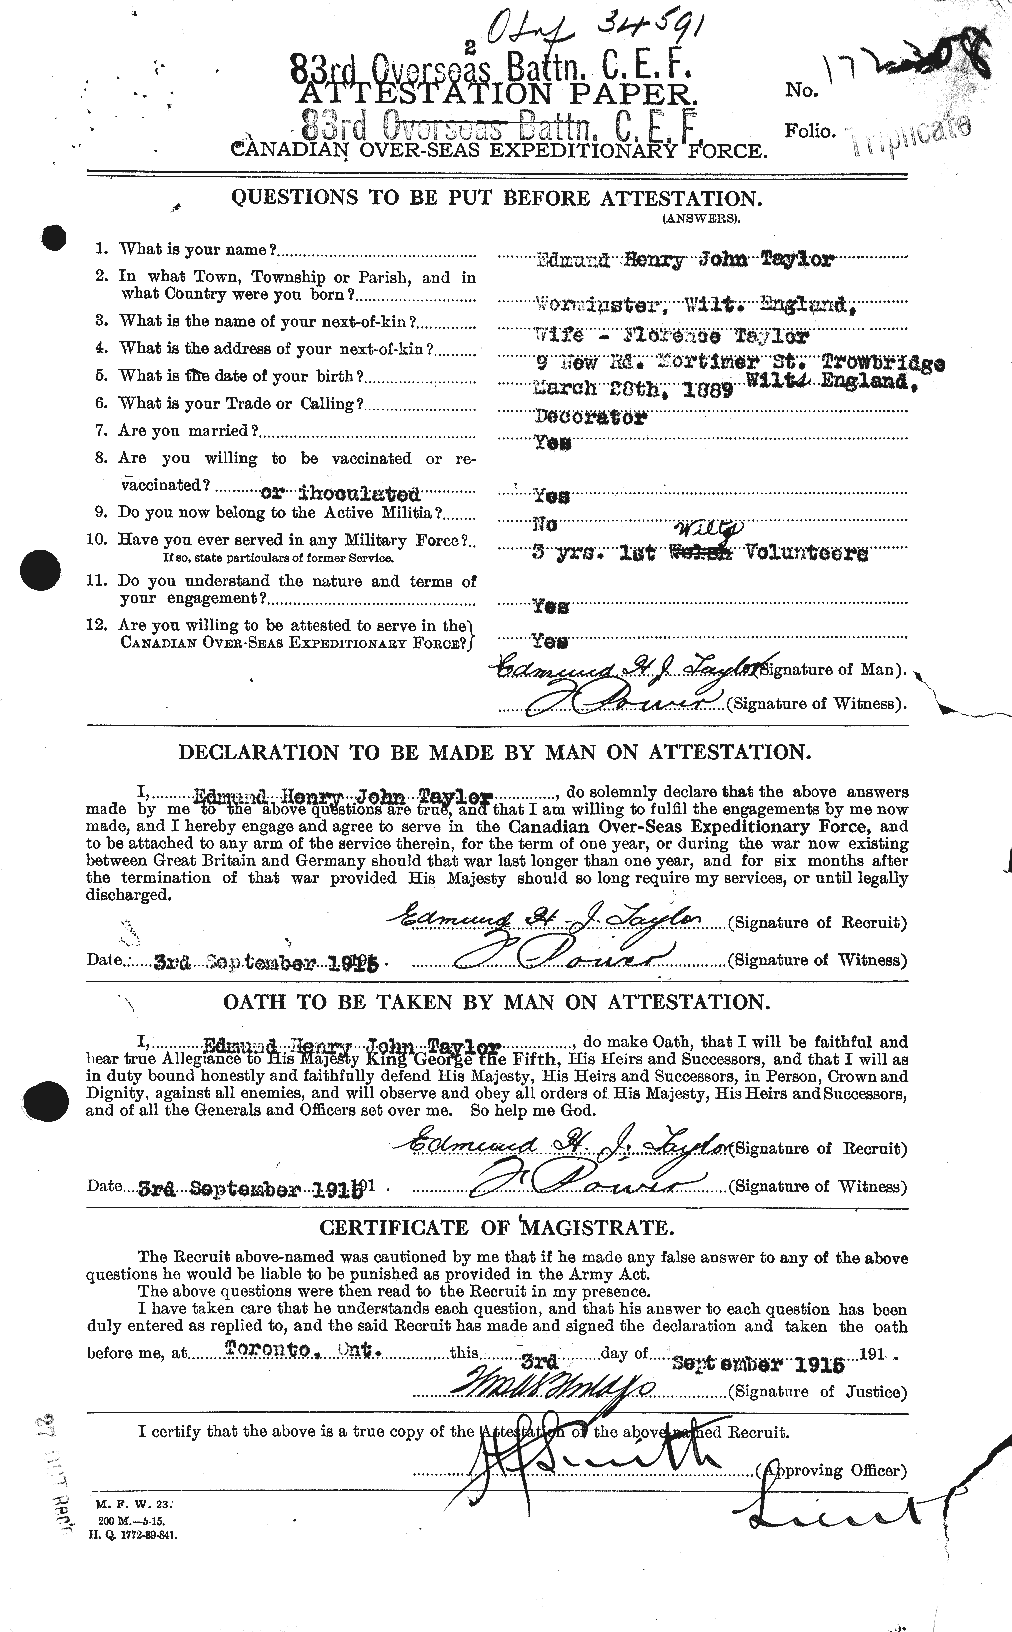 Personnel Records of the First World War - CEF 627278a